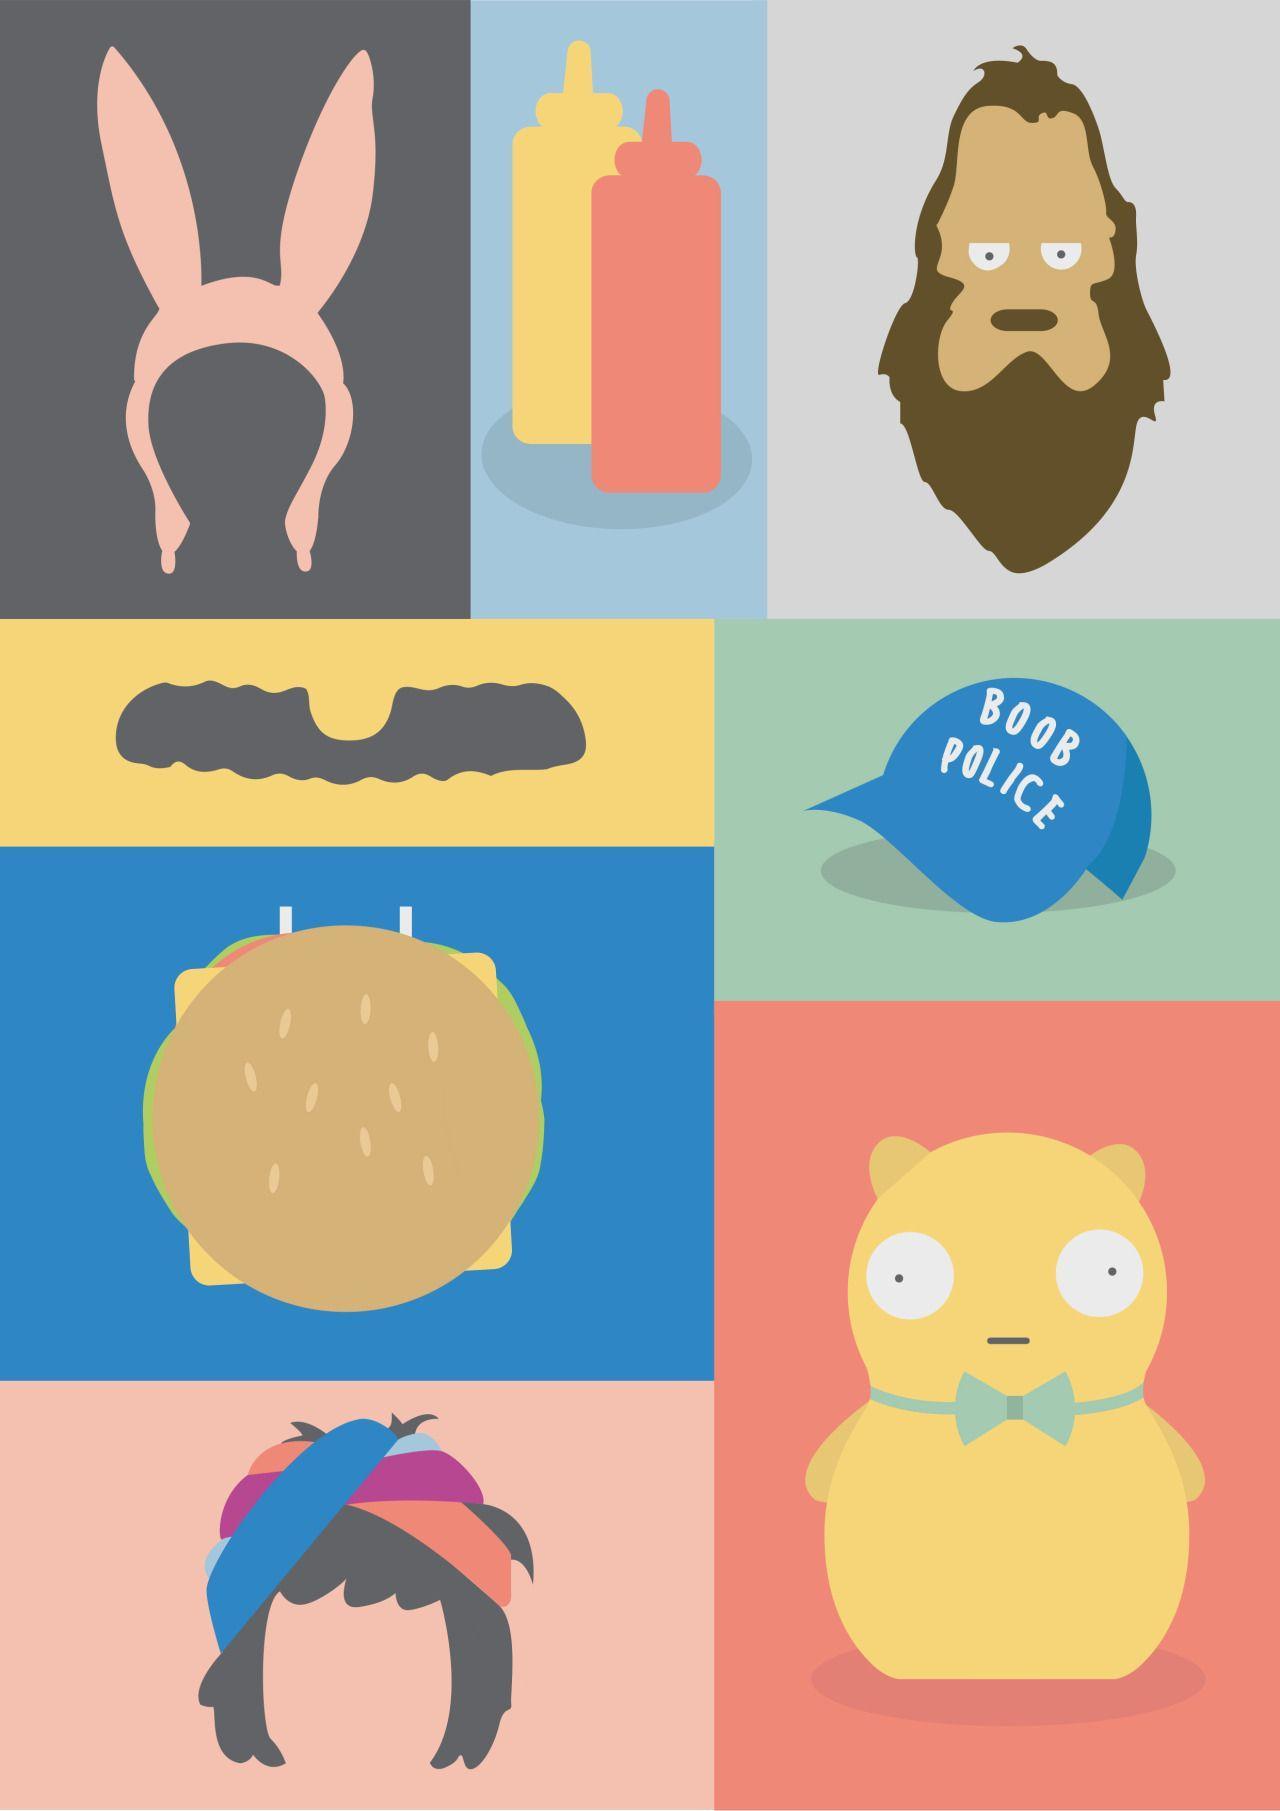 Made a wallpaper for my iPhone Figured someone else may want it too  Enjoy  rBobsBurgers